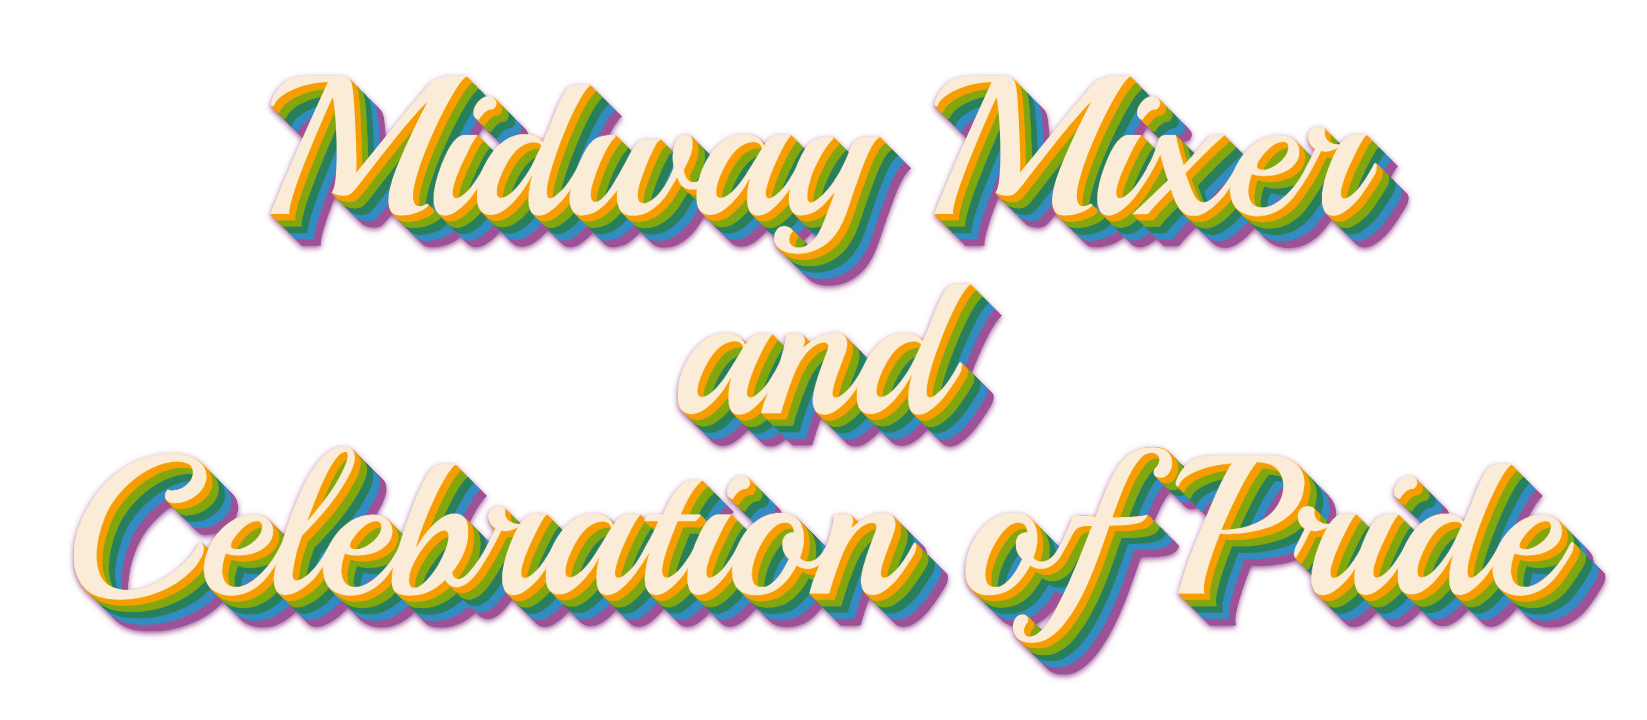 Midway Mixer and Celebration of Pride